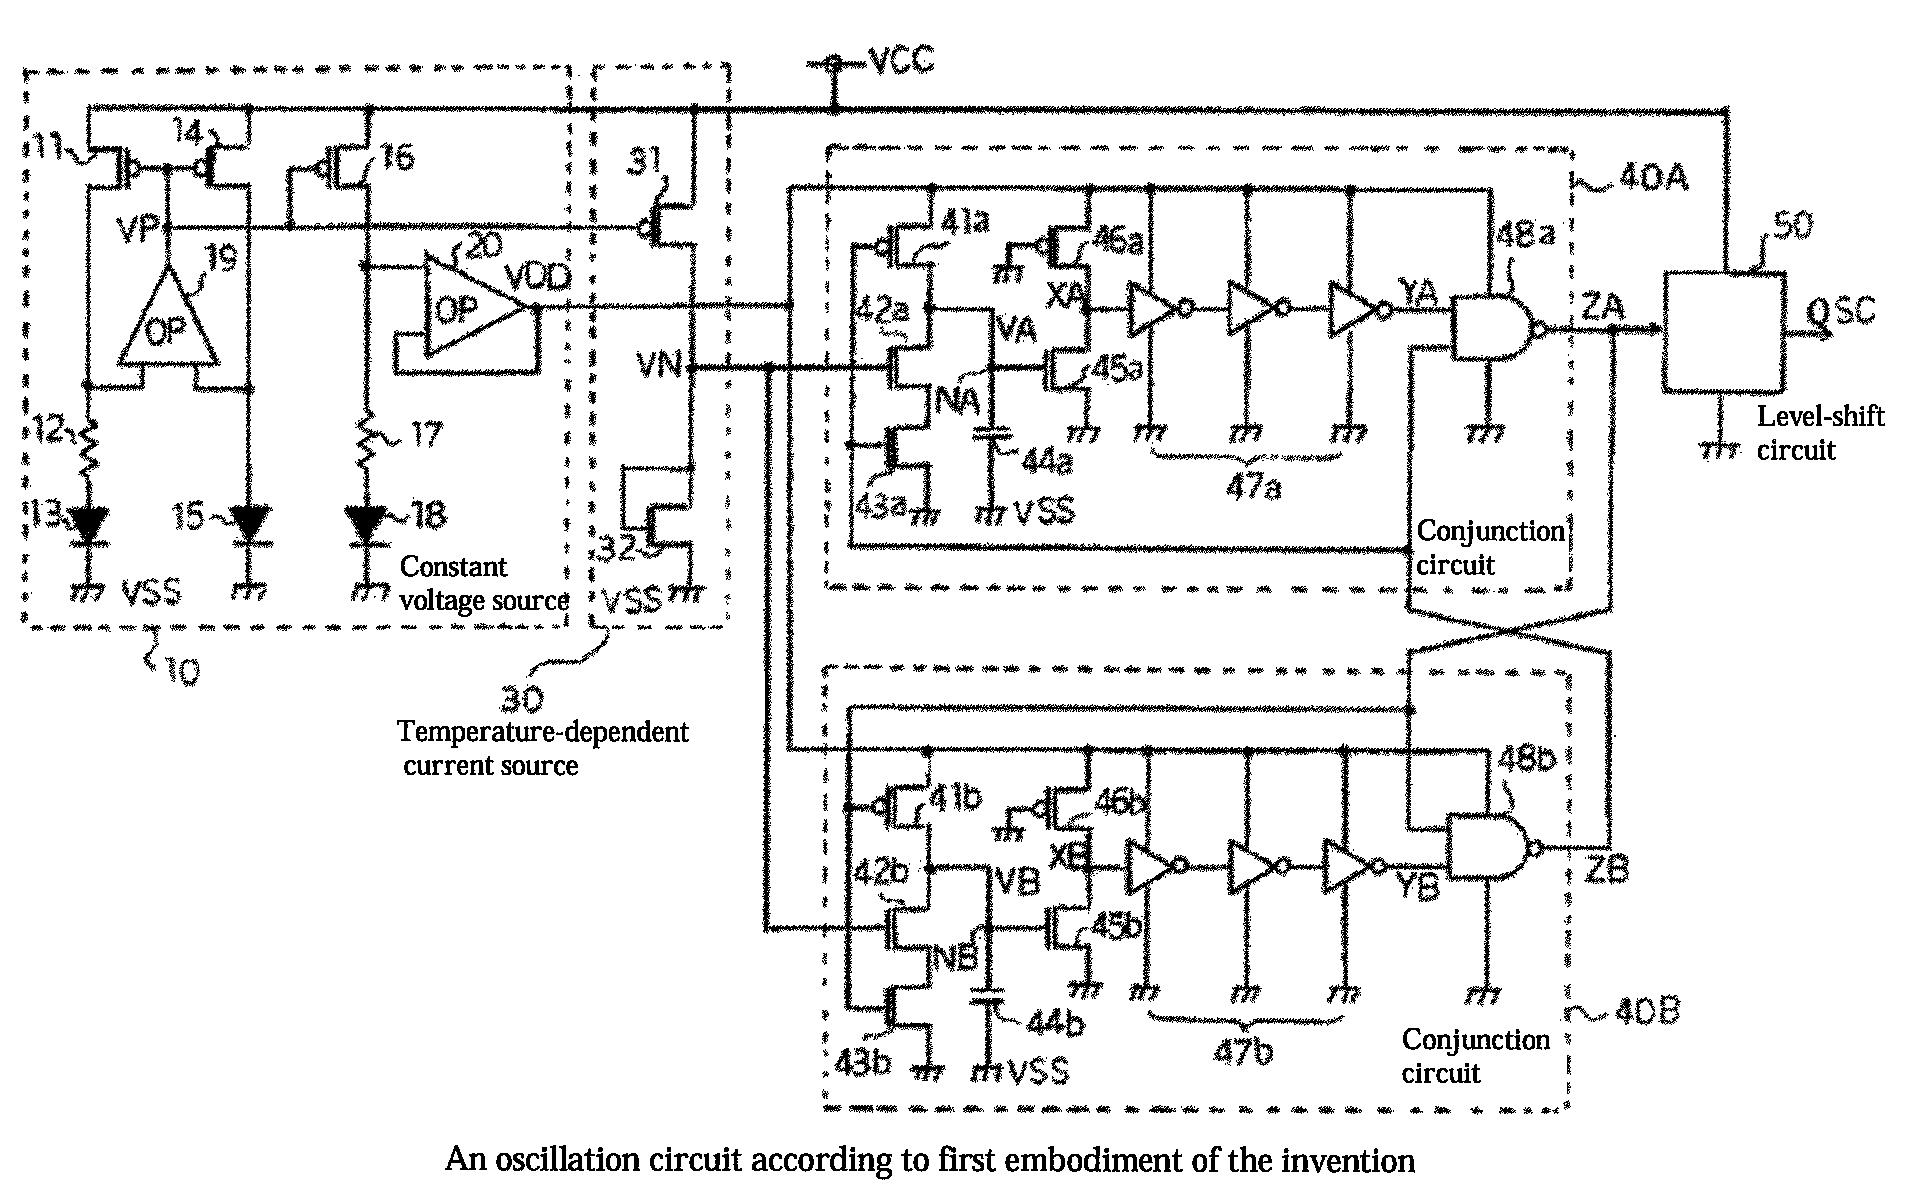 Oscillation circuit with temperature-dependent current source